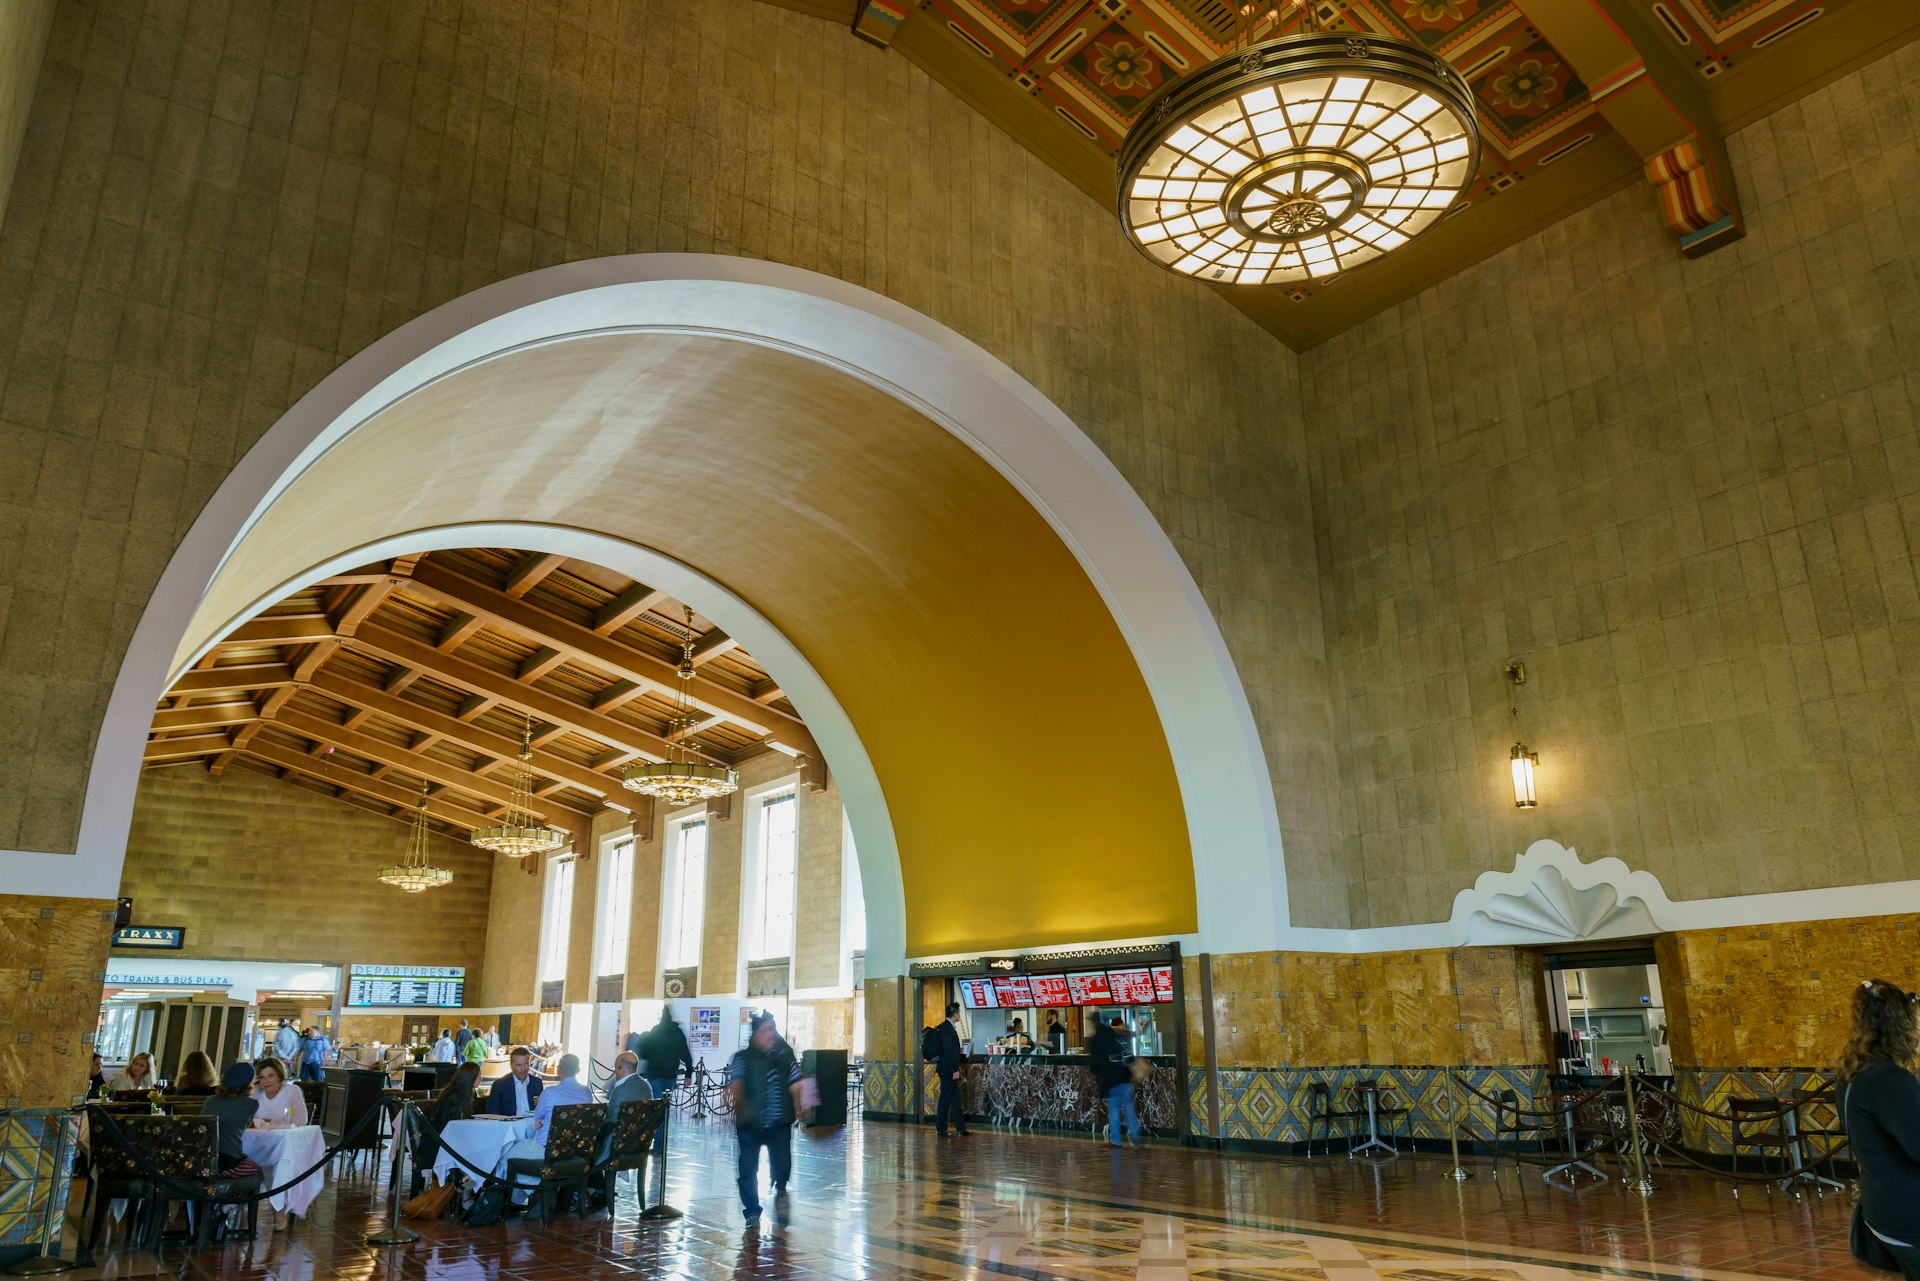 People in the grand waiting room at Union Station, Los Angeles, California, USA